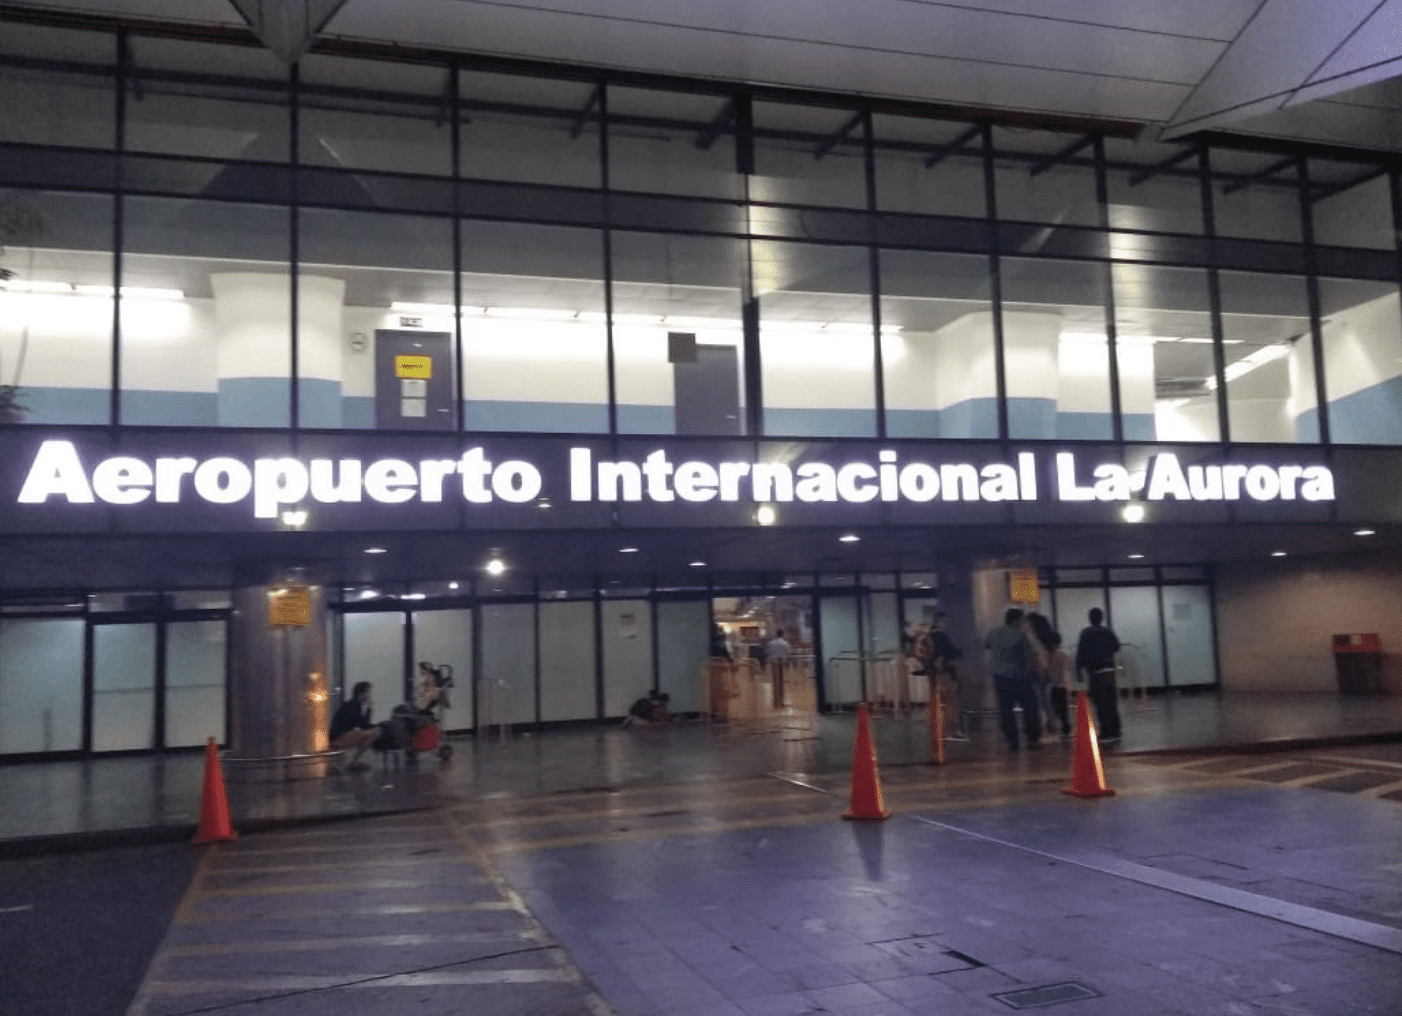 La Aurora International airport where your Guatemala travel itinerary will begin and end.